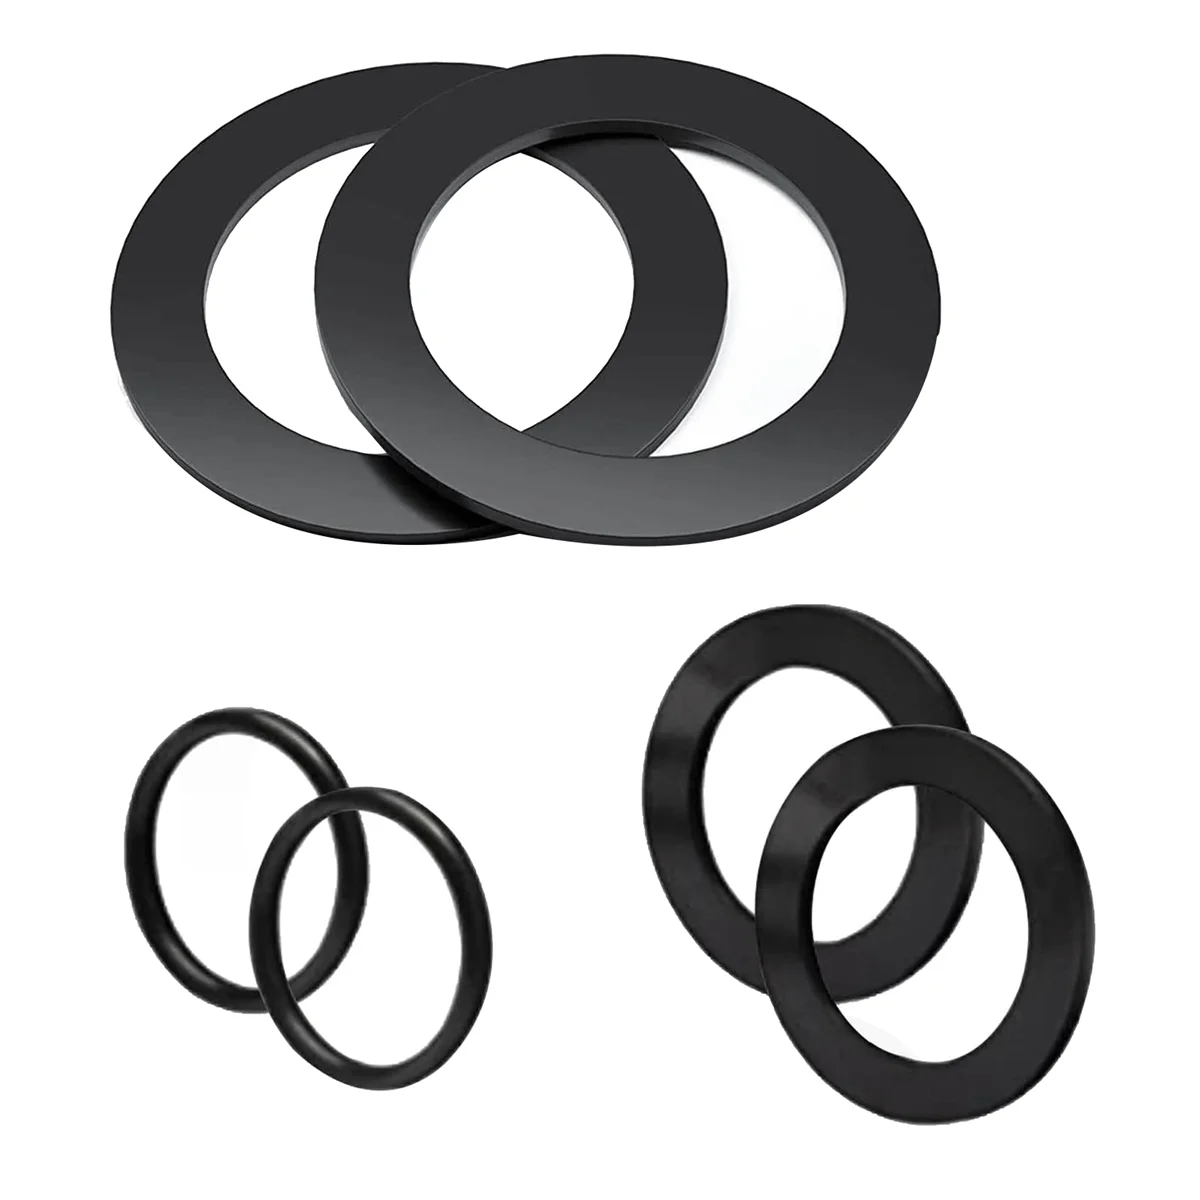 

6Pcs Pool Pump Replacement Parts 25076RP Hot Tub Parts O-Ring Rubber Washer for Pool Plunger Valves 10745 10262